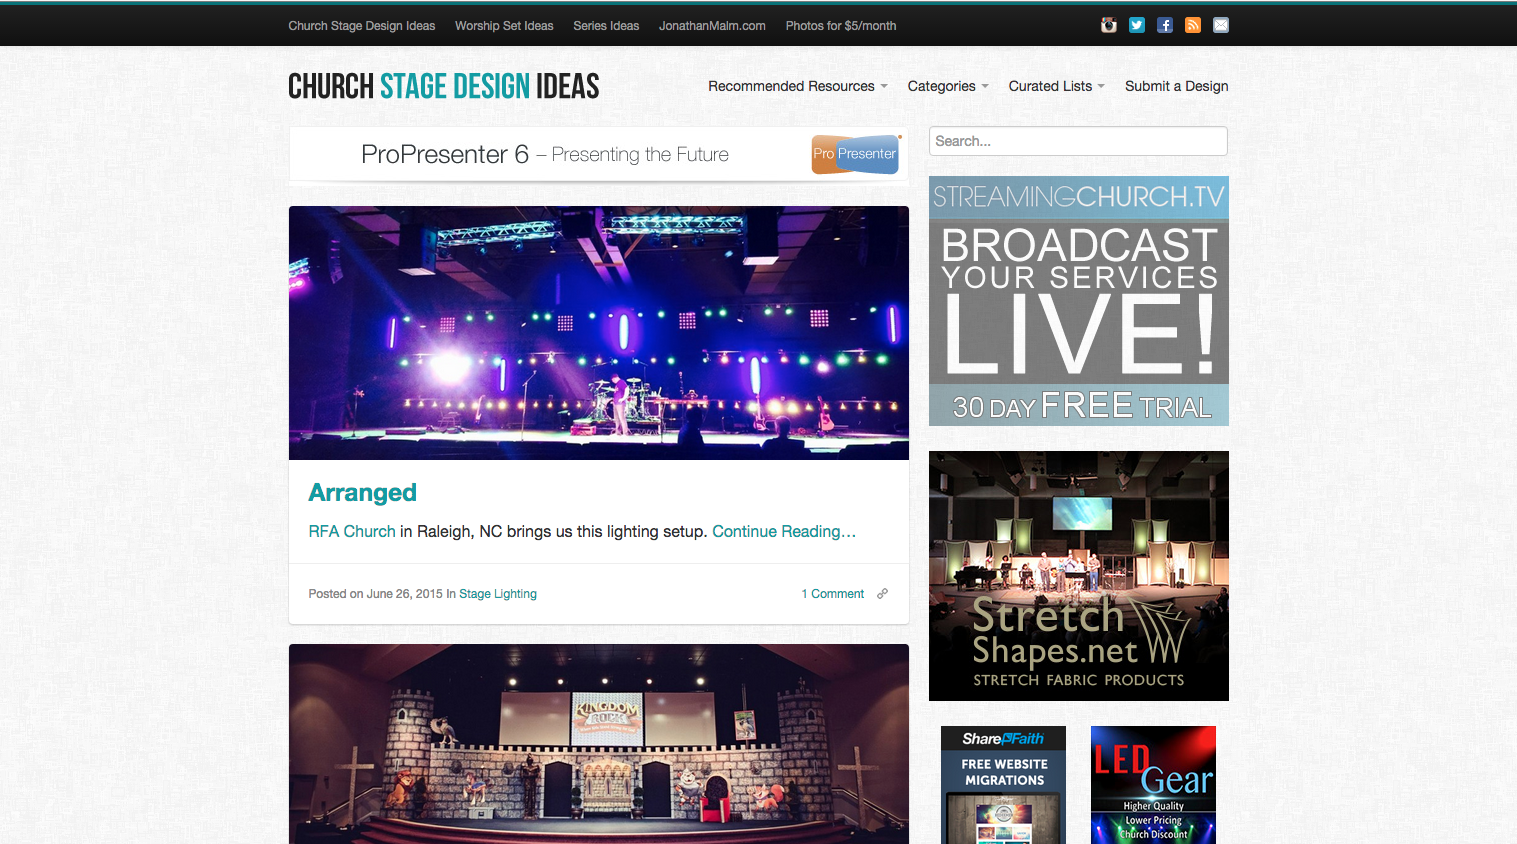 A great resource for stage design ideas